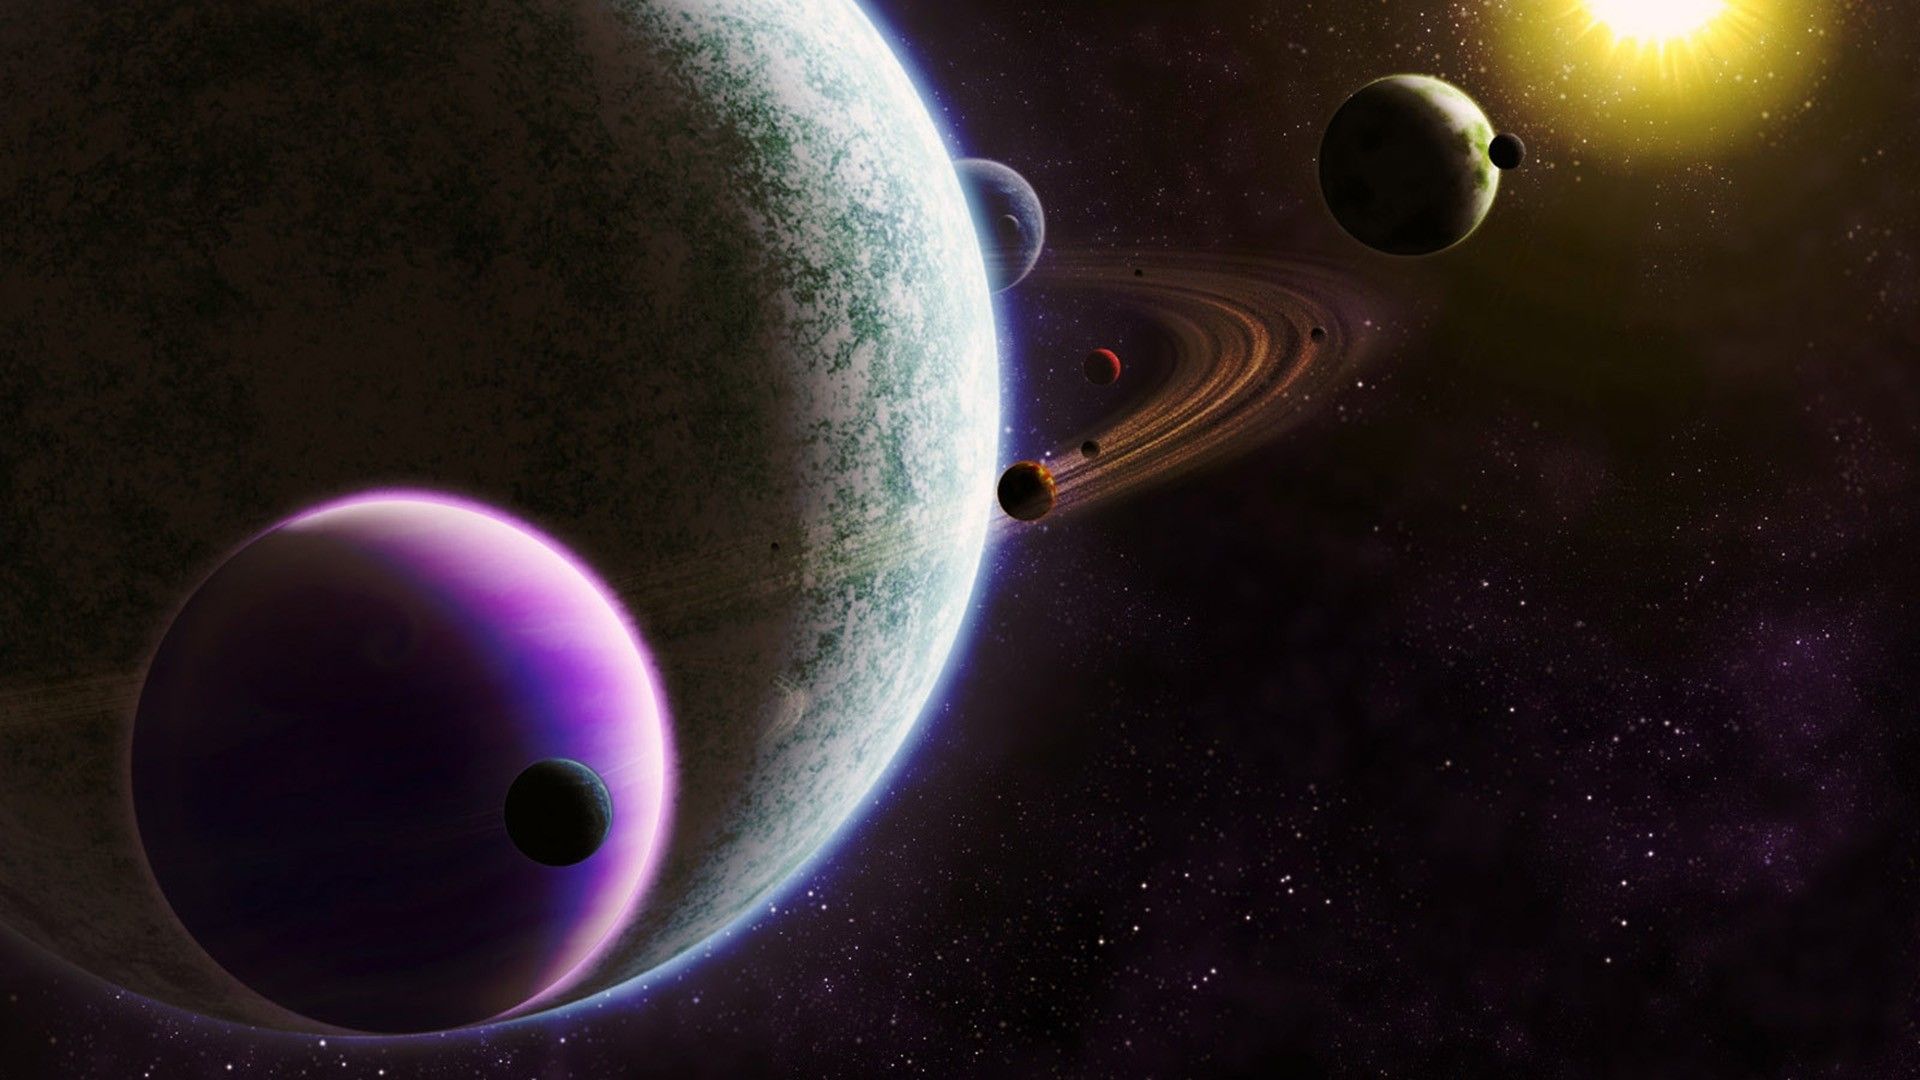 Live Of Solar System Wallpapers